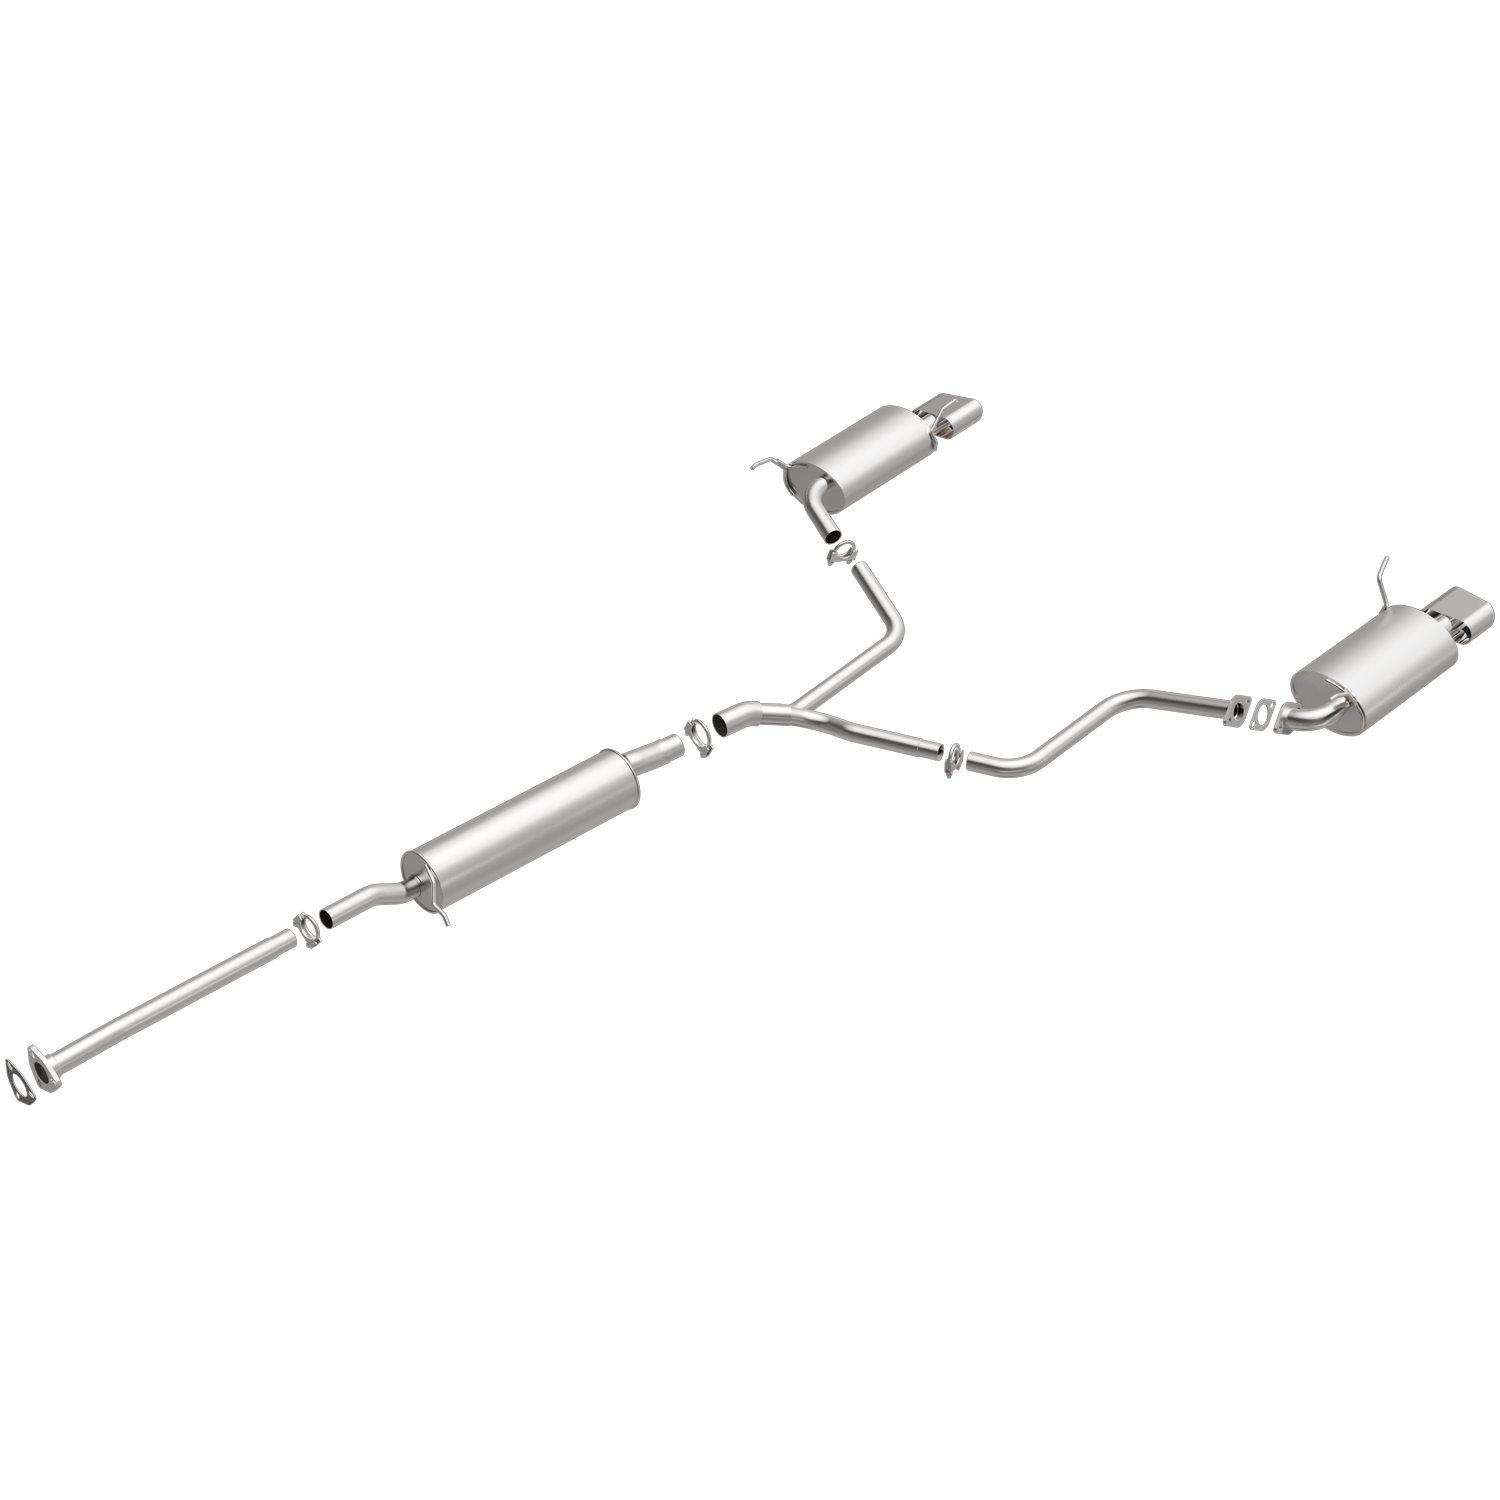 Direct-Fit Exhaust Kit, 2004-2006 Acura MDX 3.5L